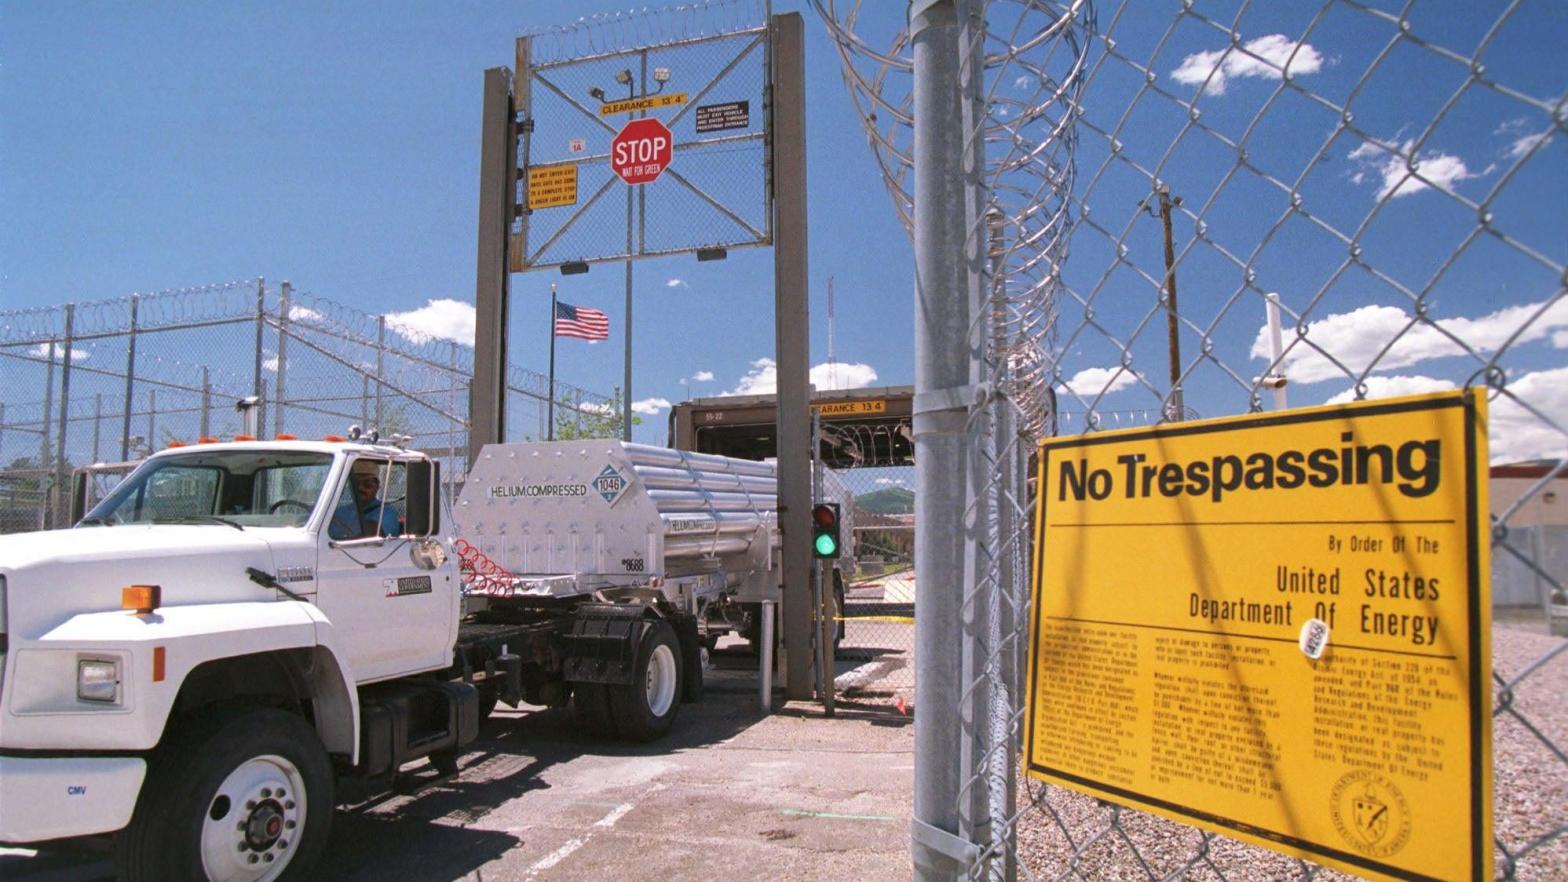 A truck leaving the heavily guarded Plutonium Facility at Los Alamos National Laboratory in Los Alamos, New Mexico, in June 1999. (Photo: Joe Raedle / Newsmakers, Getty Images)